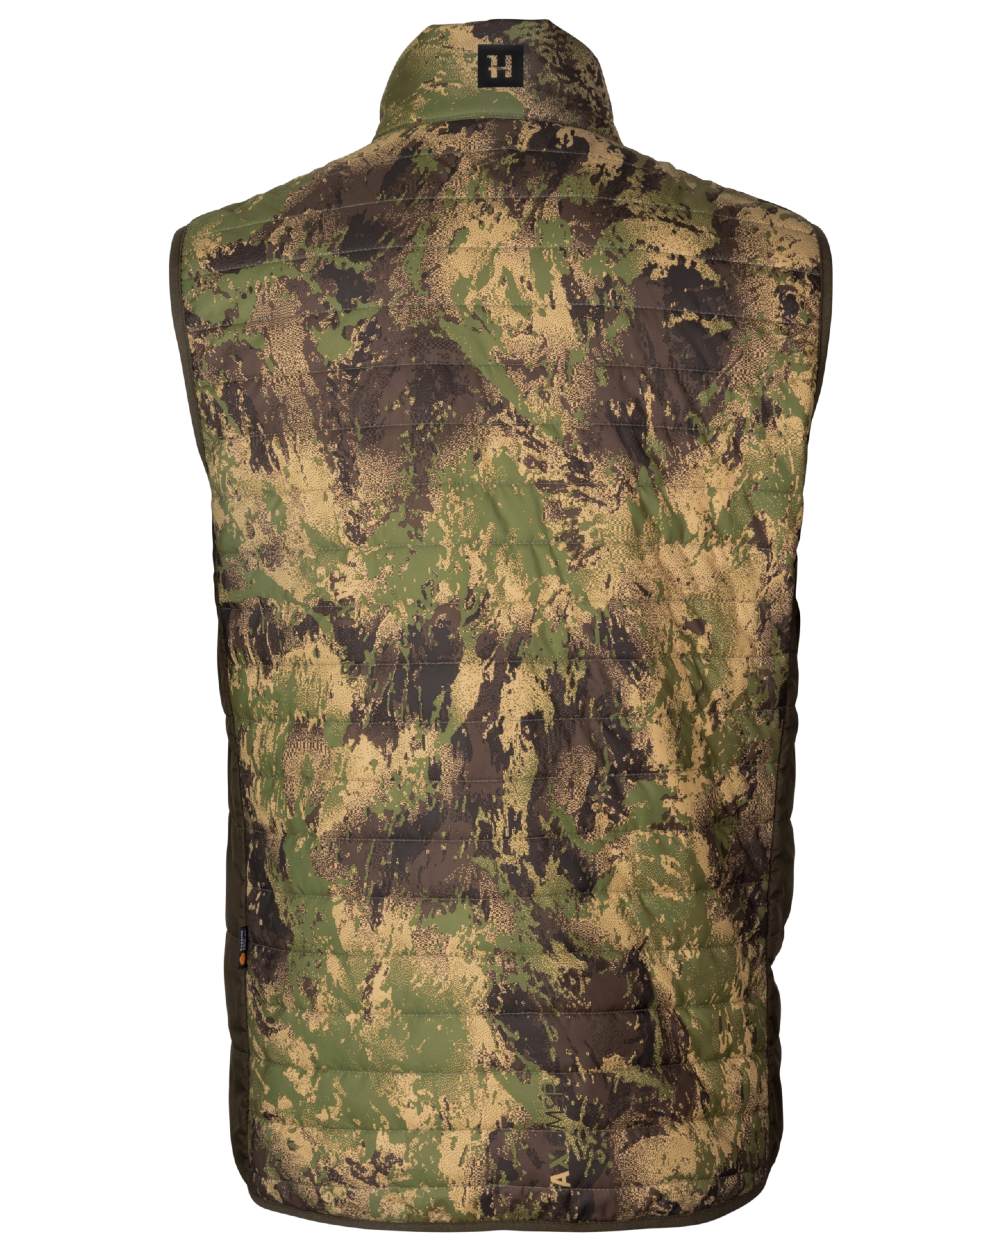 AXIS Forest coloured Harkila Deer Stalker Camo Reversible Packable Waistcoat on white background